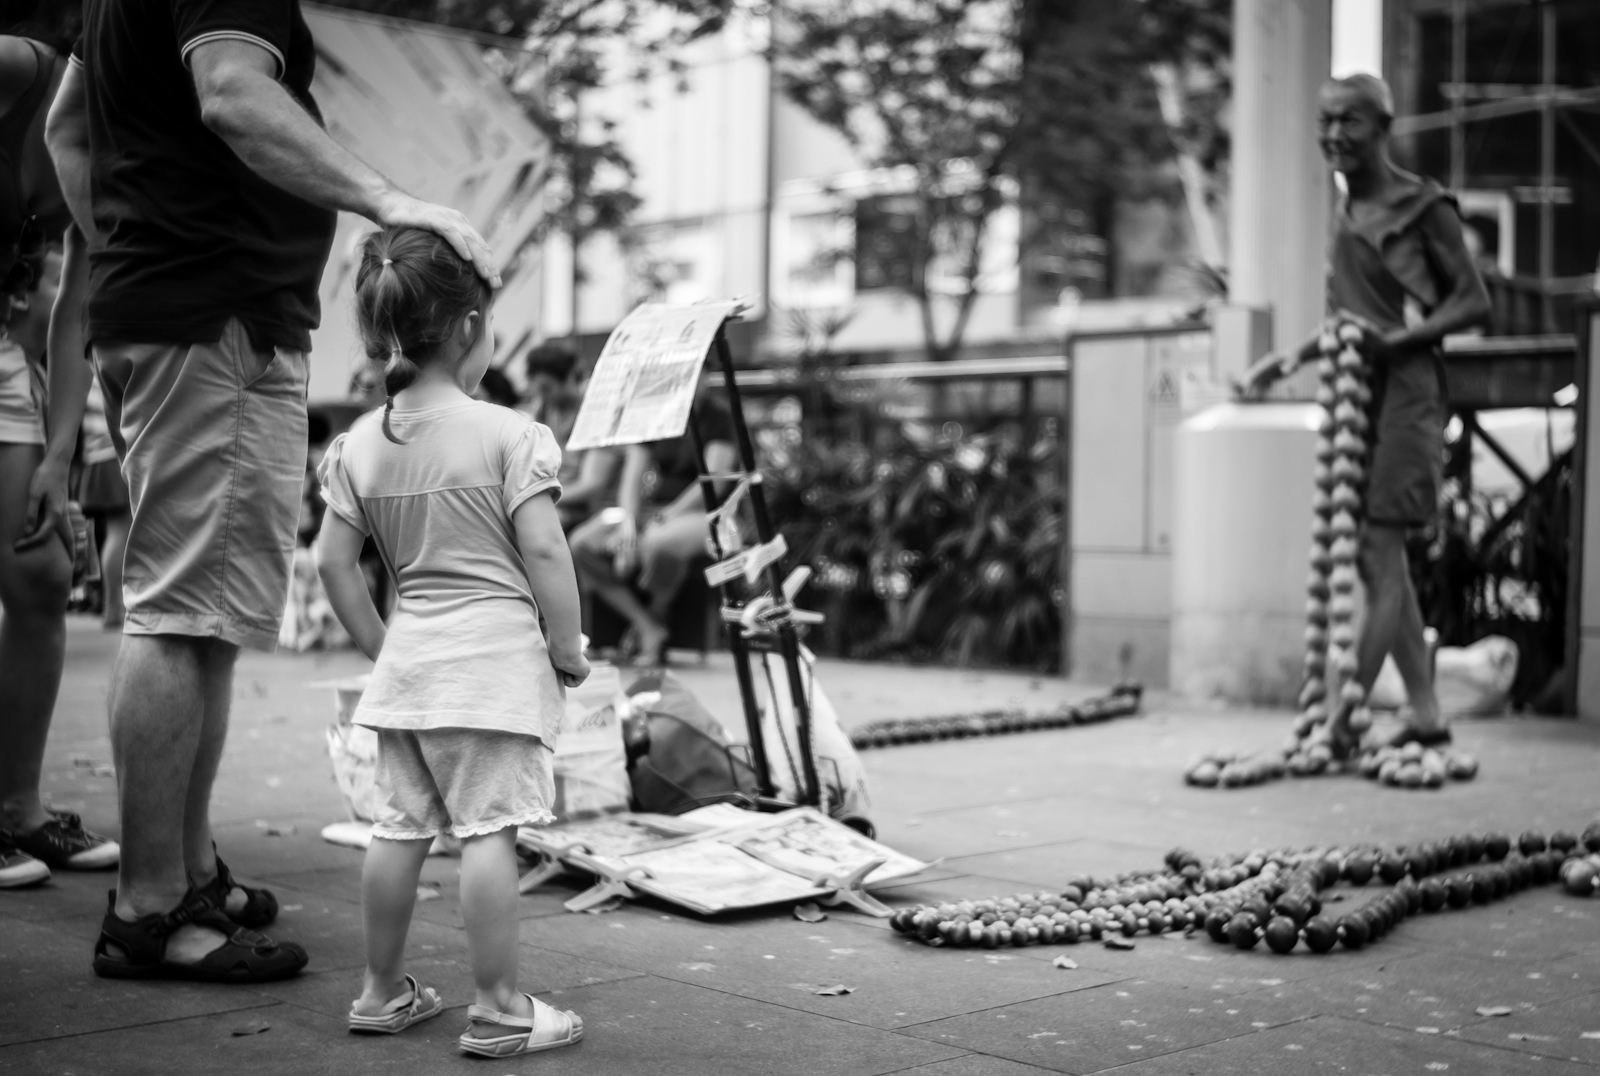 Street photography - Man patting his daughter's head as she watches the street performer